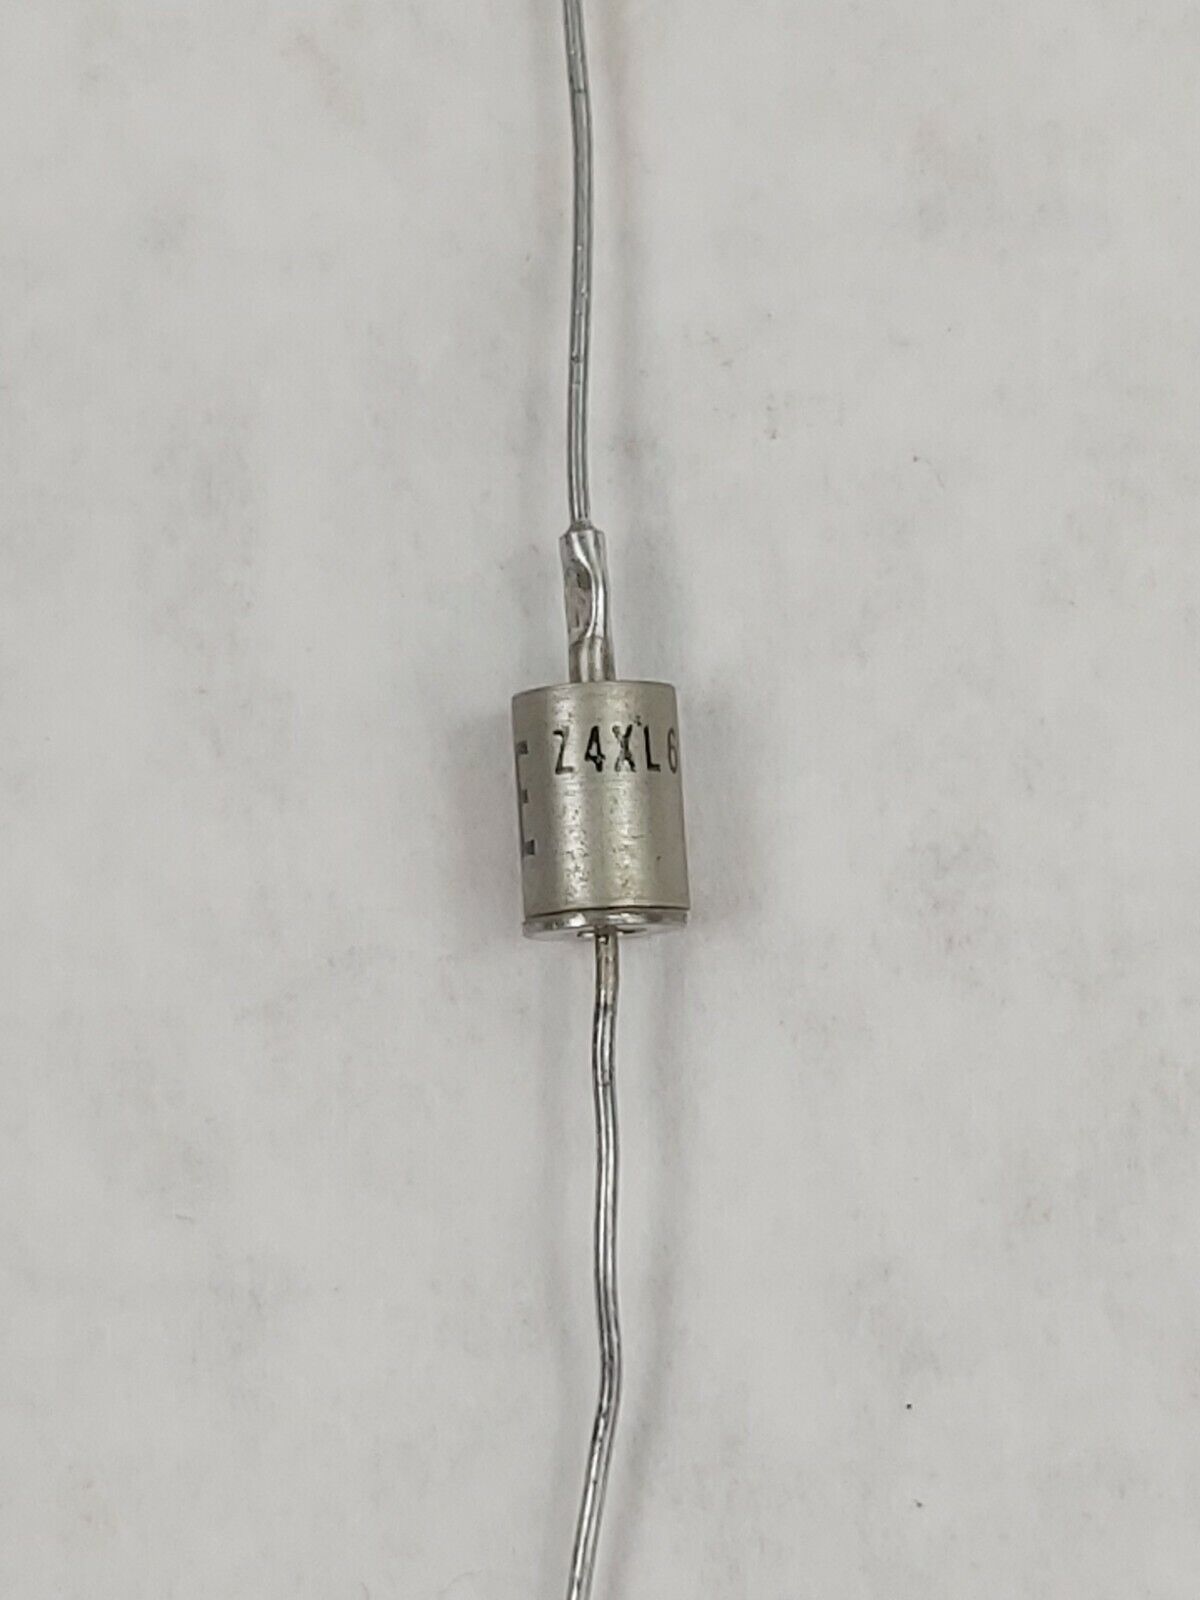 General Electric Z4XL6.2 Semiconductor